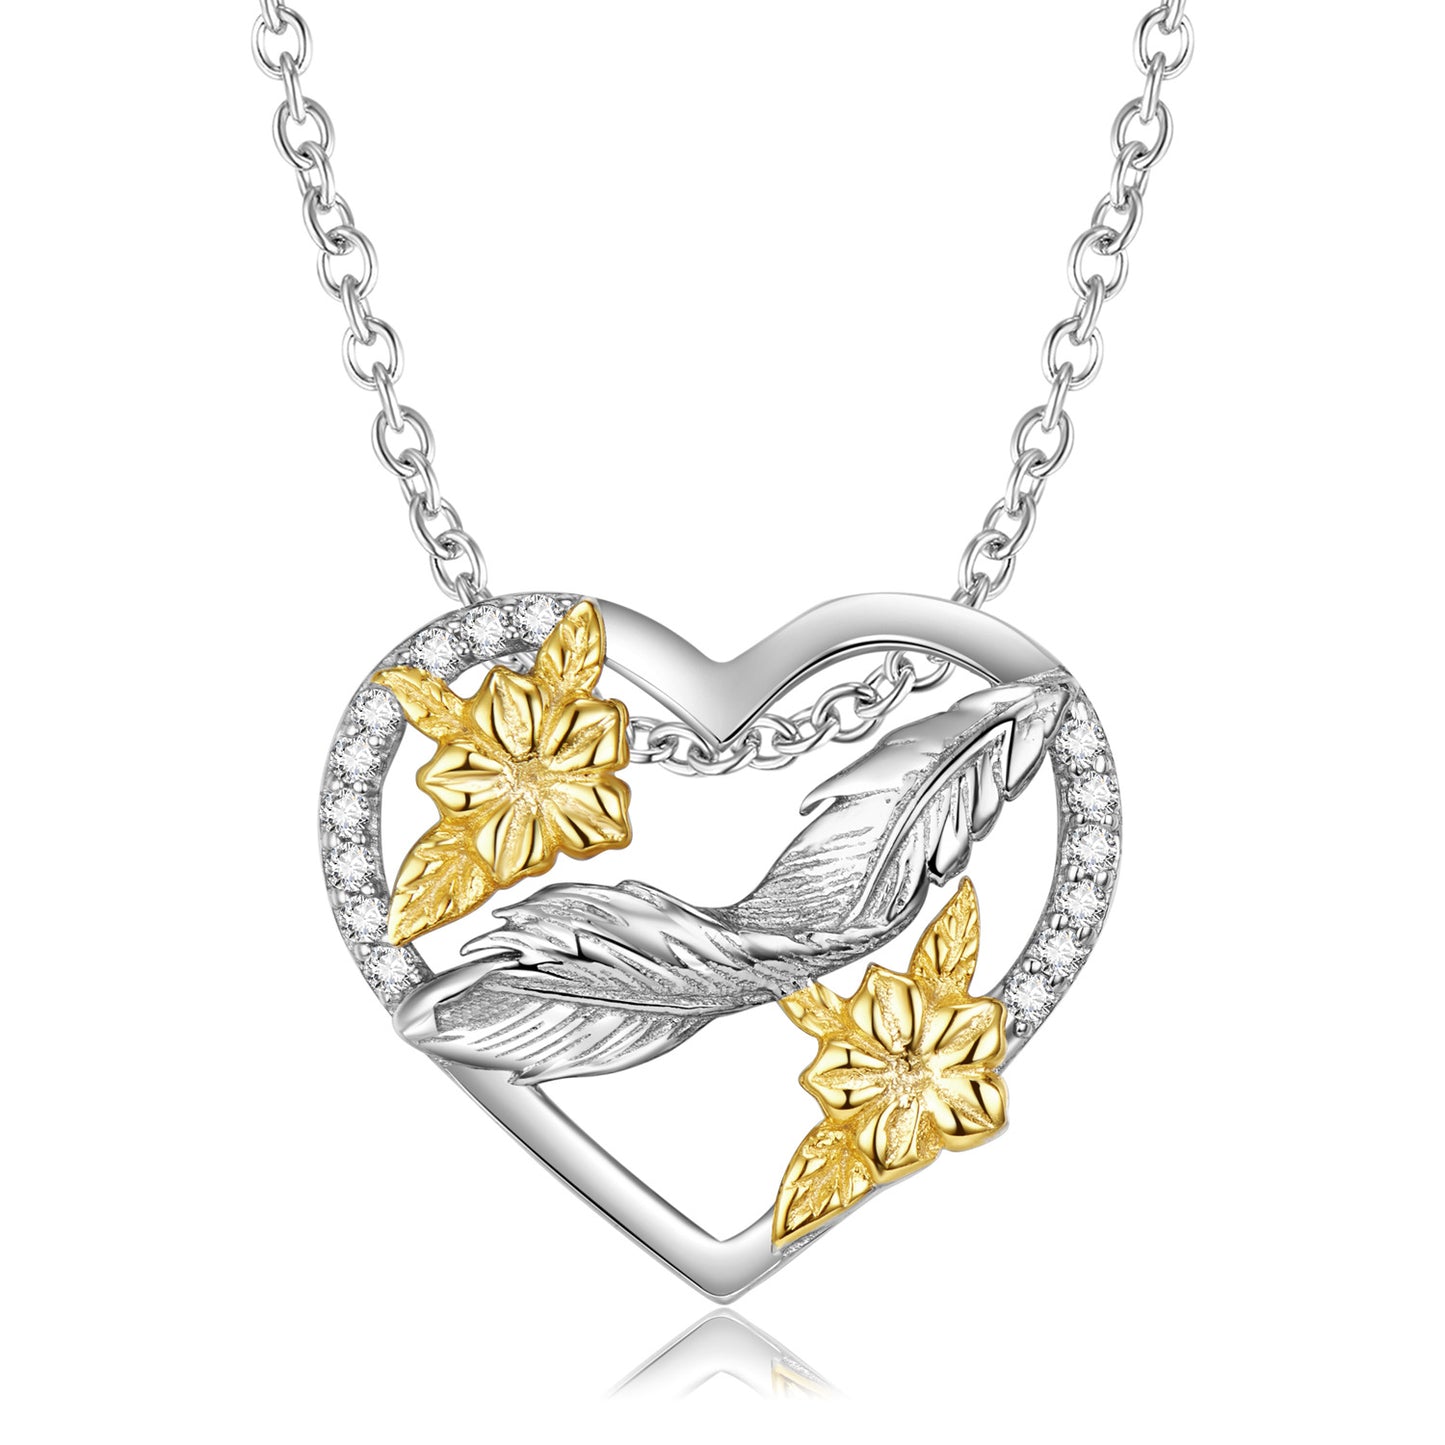 Feather and Golden Flowers Heart Shape Pendant Silver Necklace